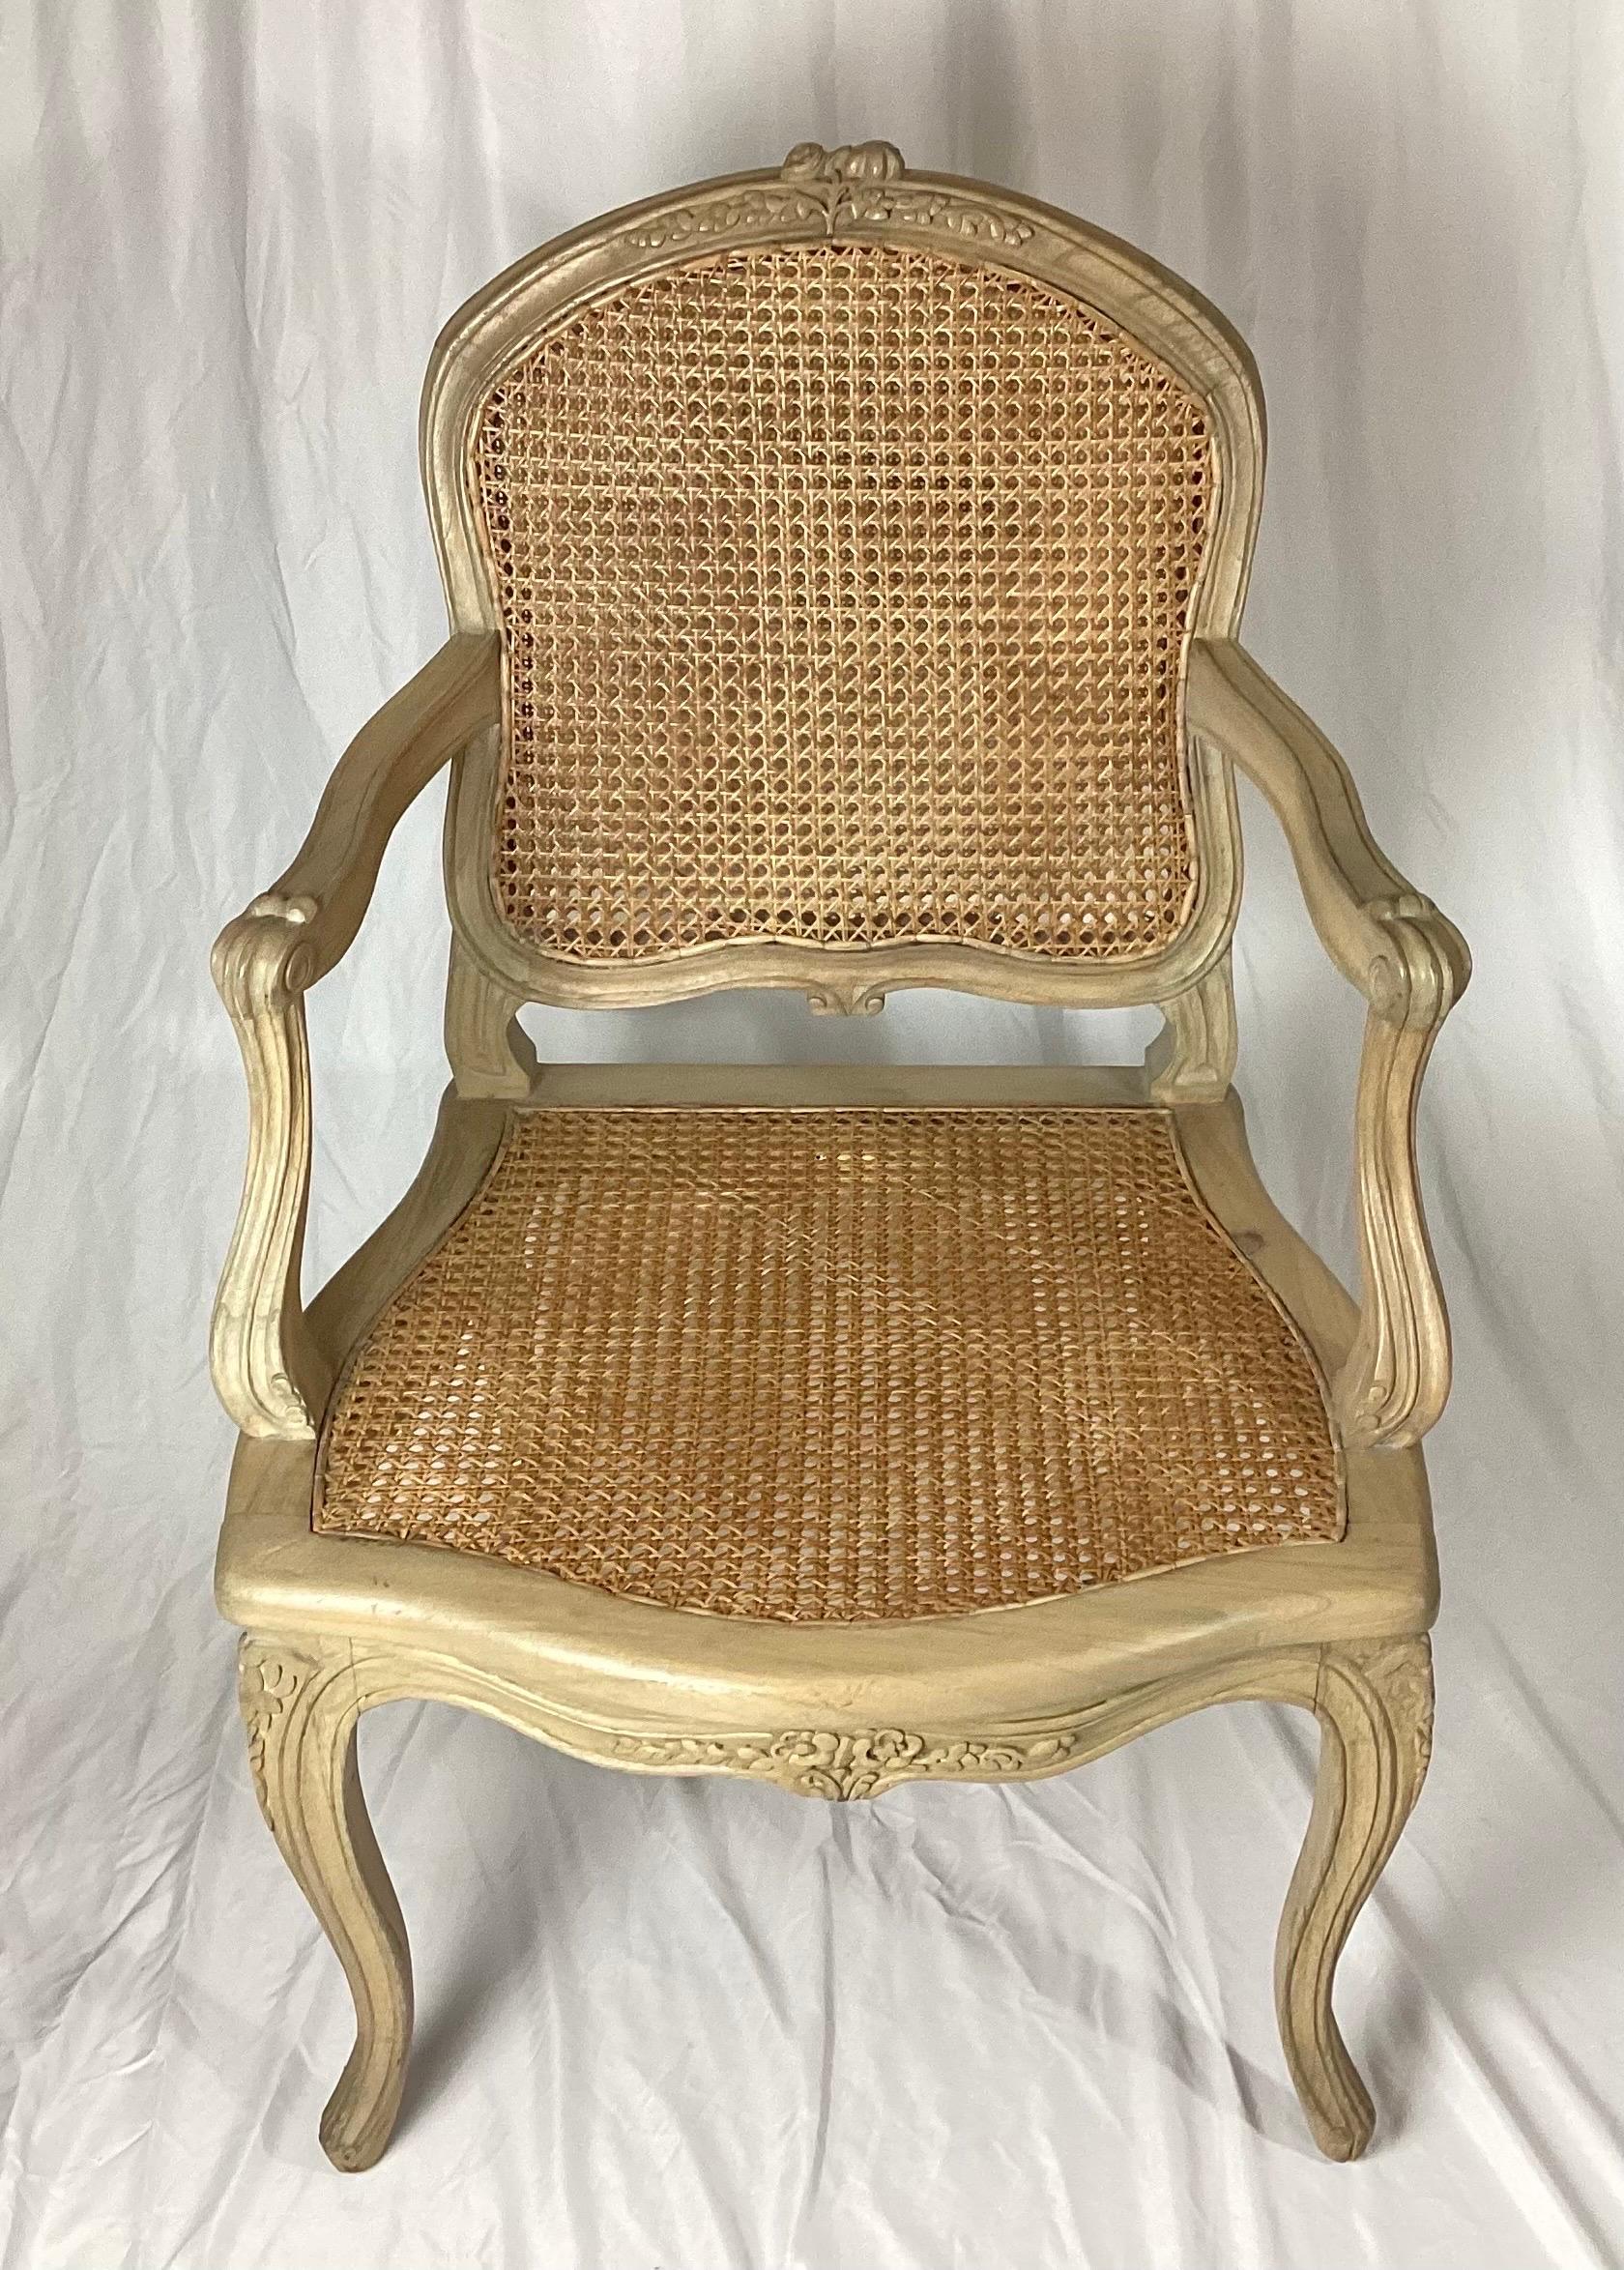 Country French Pickled Pine Double Caned Armchair by Furniture Classic Norfolk VA. Nice double caning. Perfect for a bedroom or extra seating.